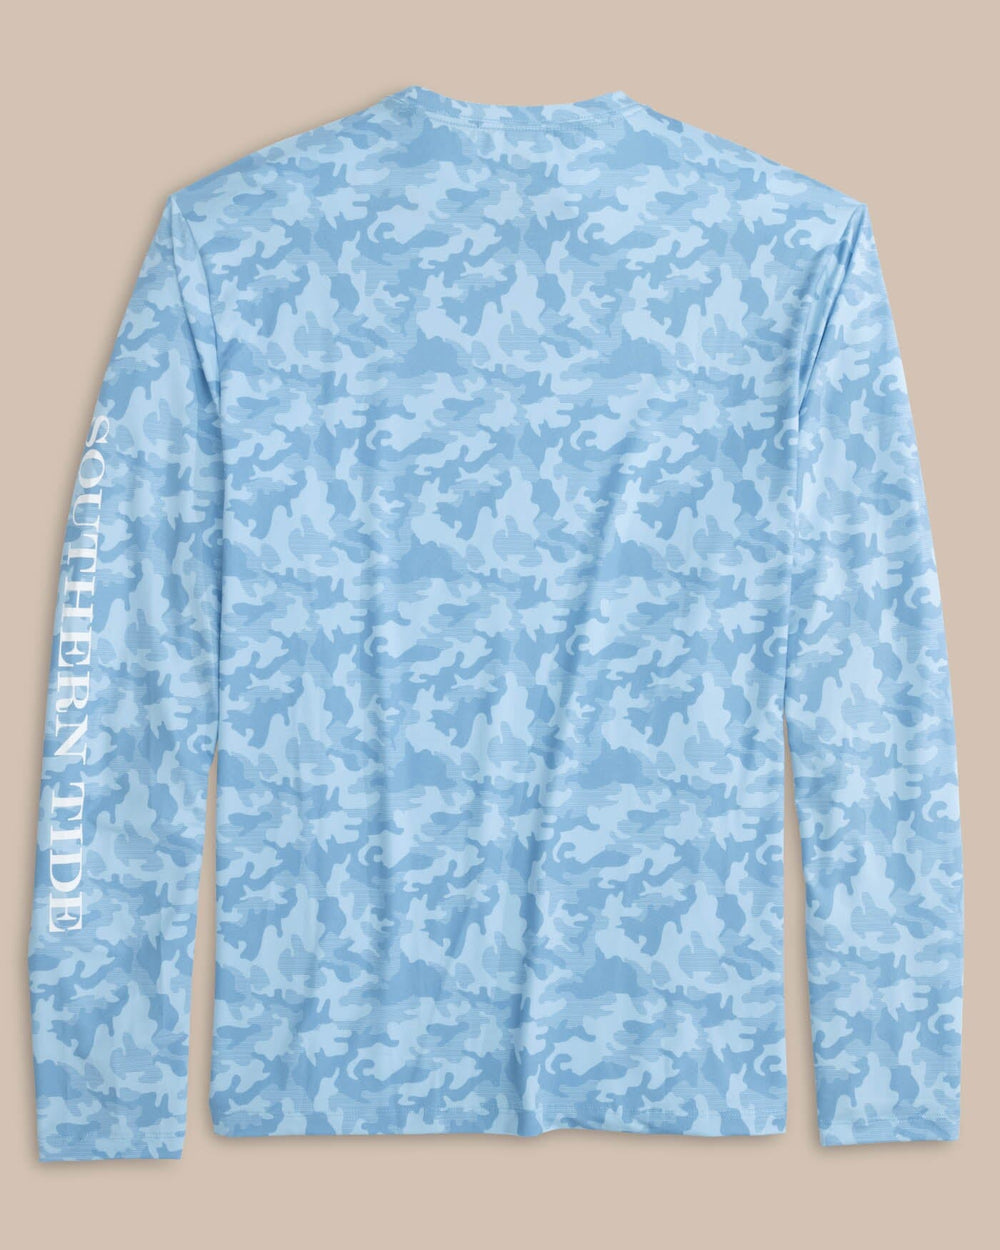 The back view of the Southern Tide Island Camo Long Sleeve Performance T-shirt by Southern Tide - Clearwater Blue